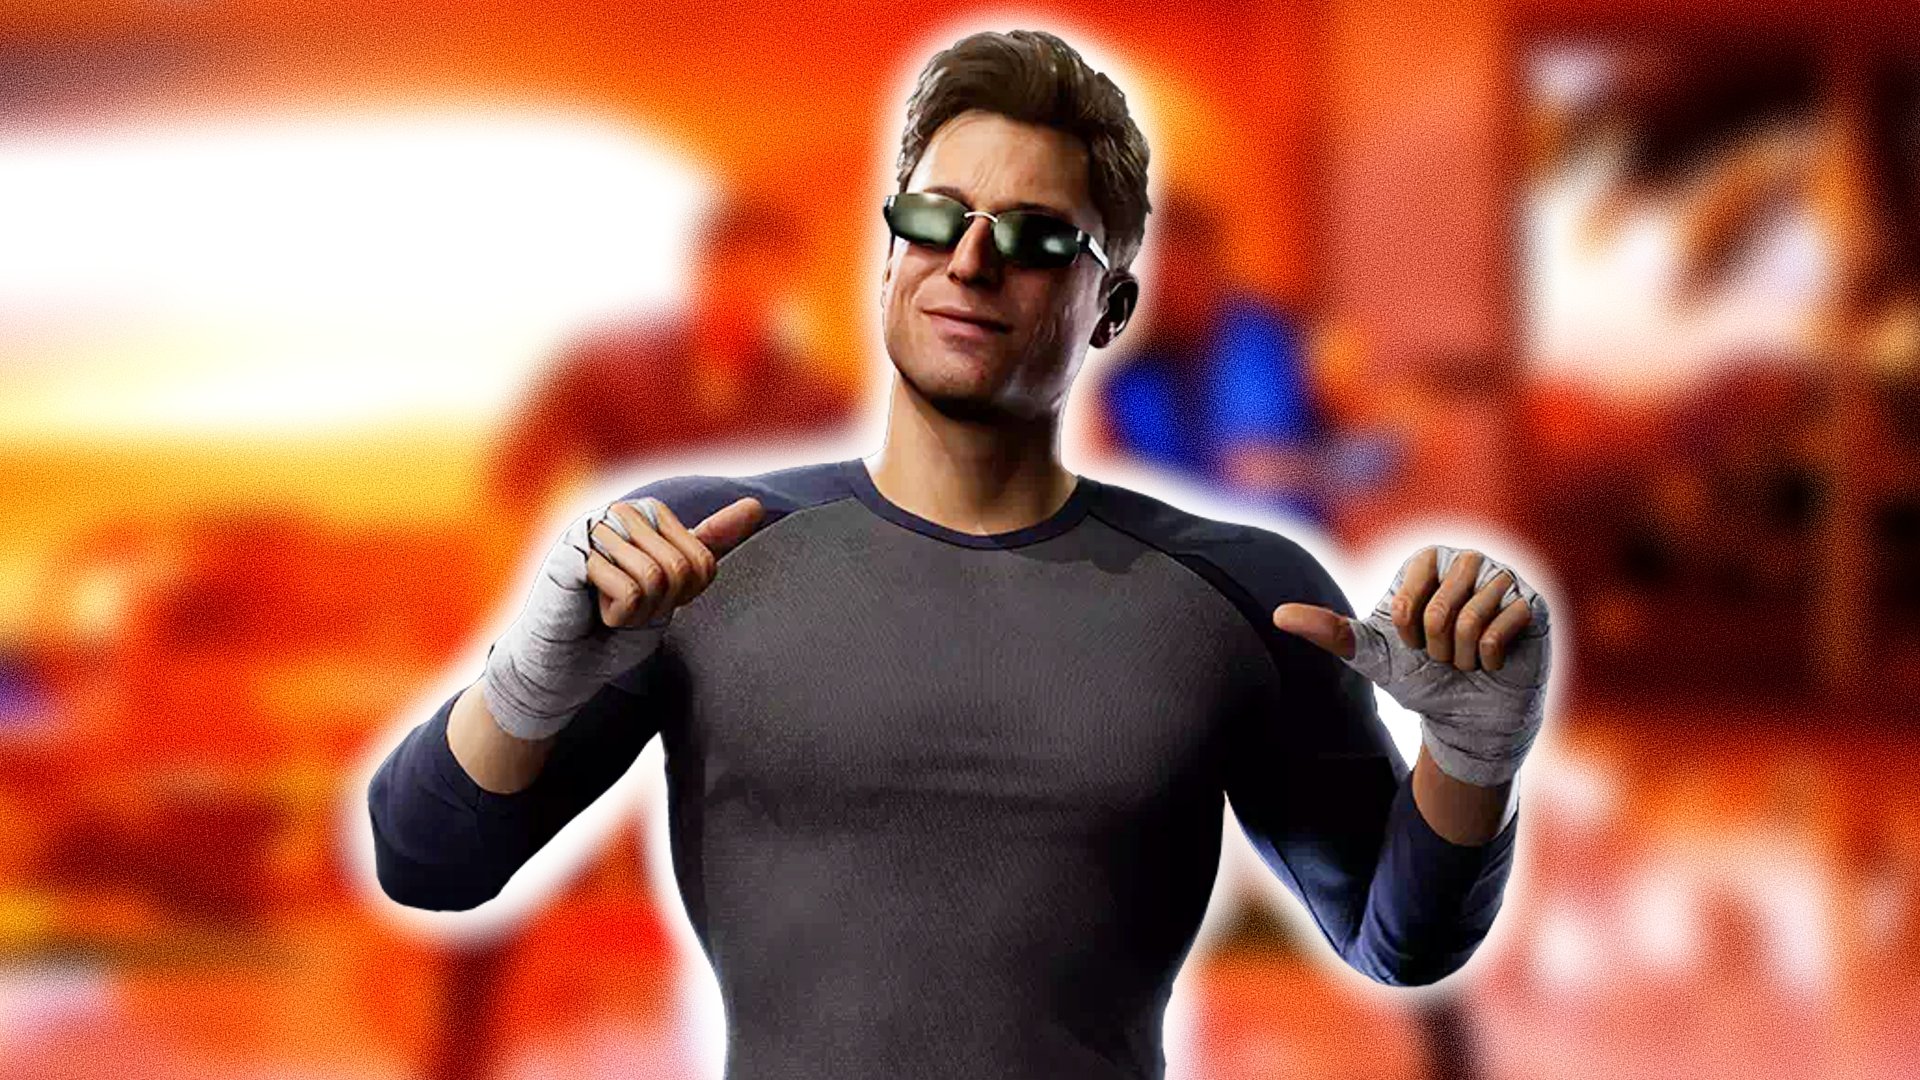 ﻿MK1 finally rewards being a show off, but only if you’re Johnny Cage